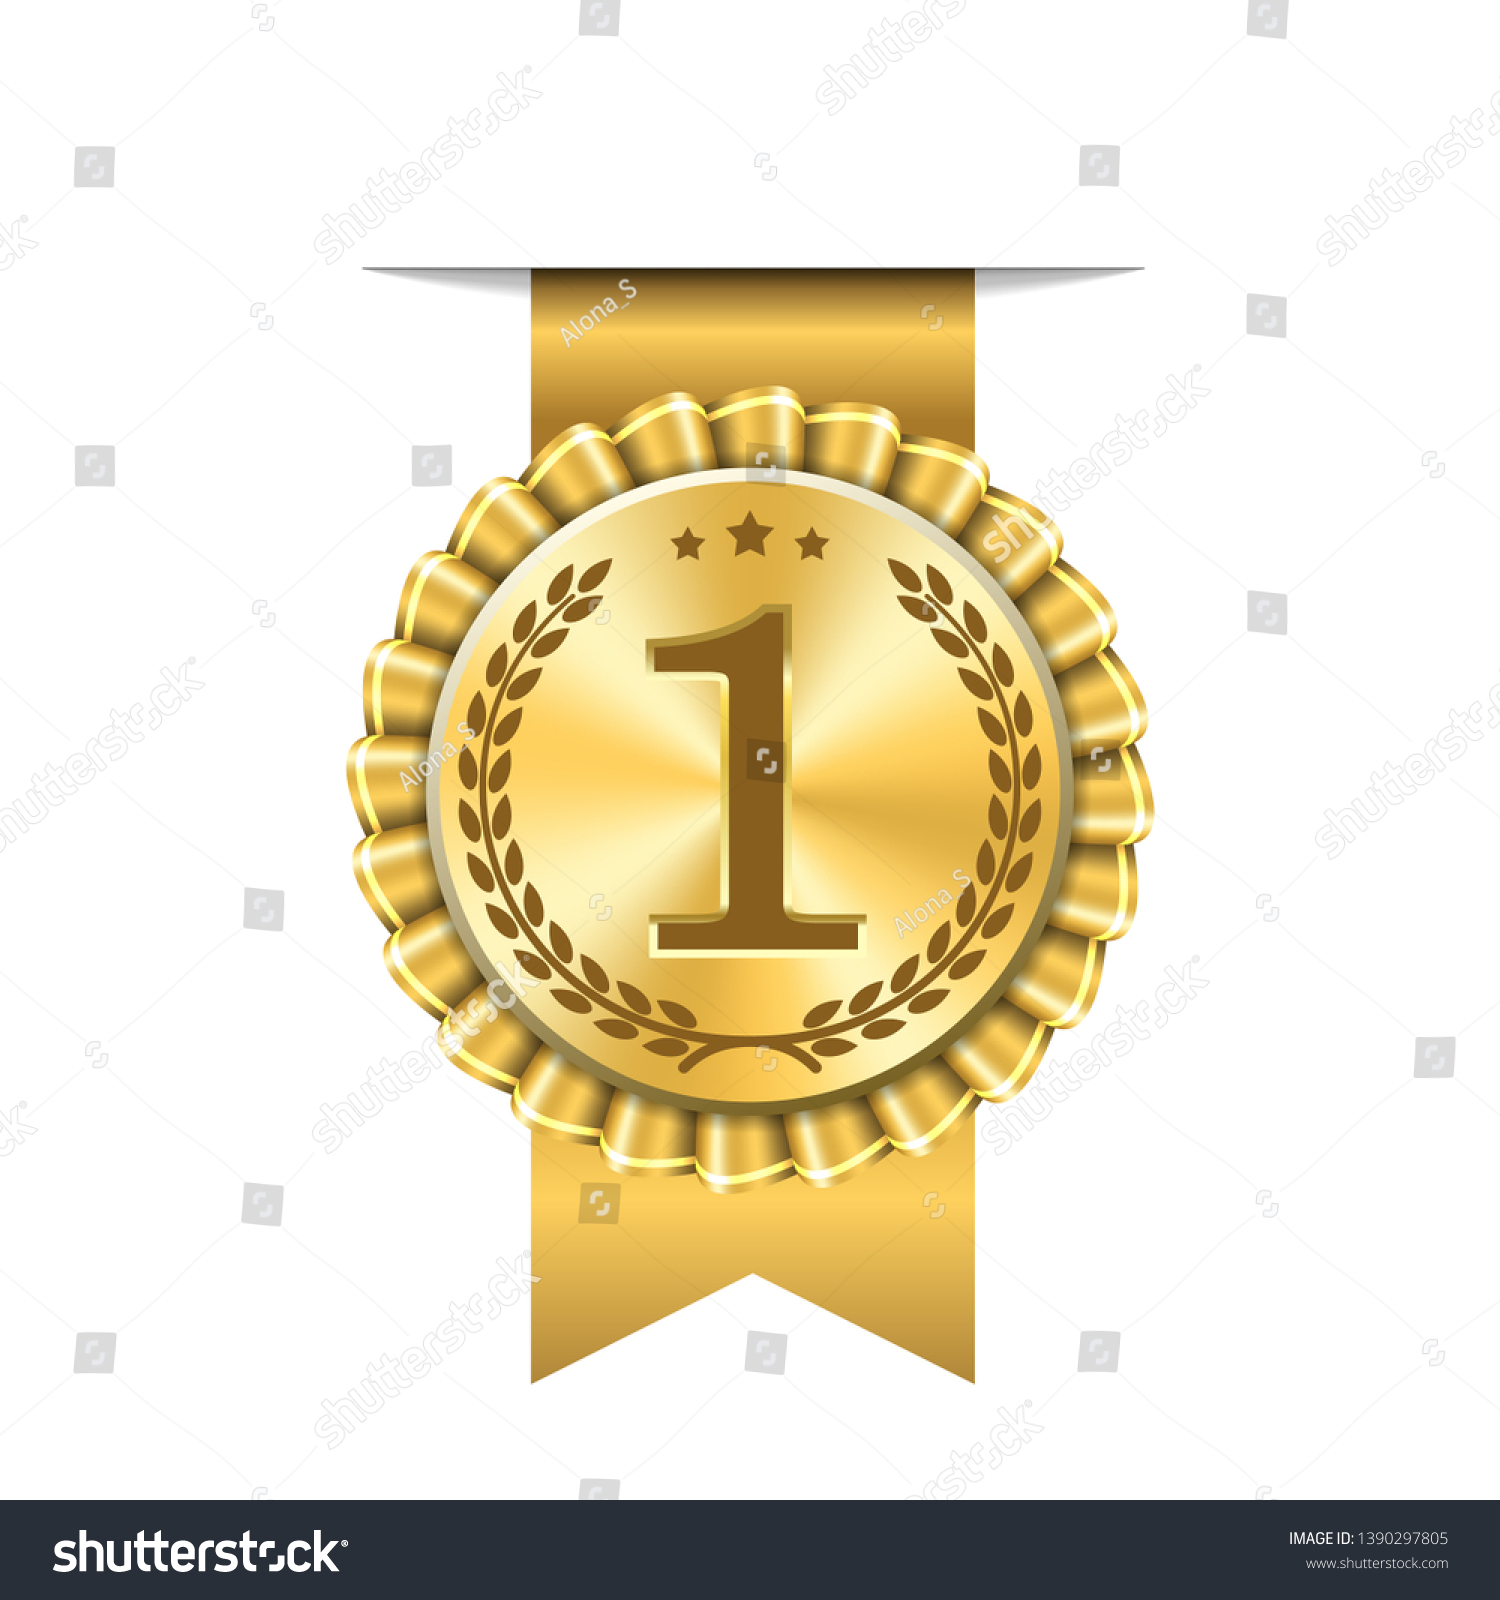 Award ribbon gold icon number first. Design winner golden medal 1 prize. Symbol best trophy, 1st success champion, one sport competition honor, achievement leadership, victory Vector illustration #1390297805